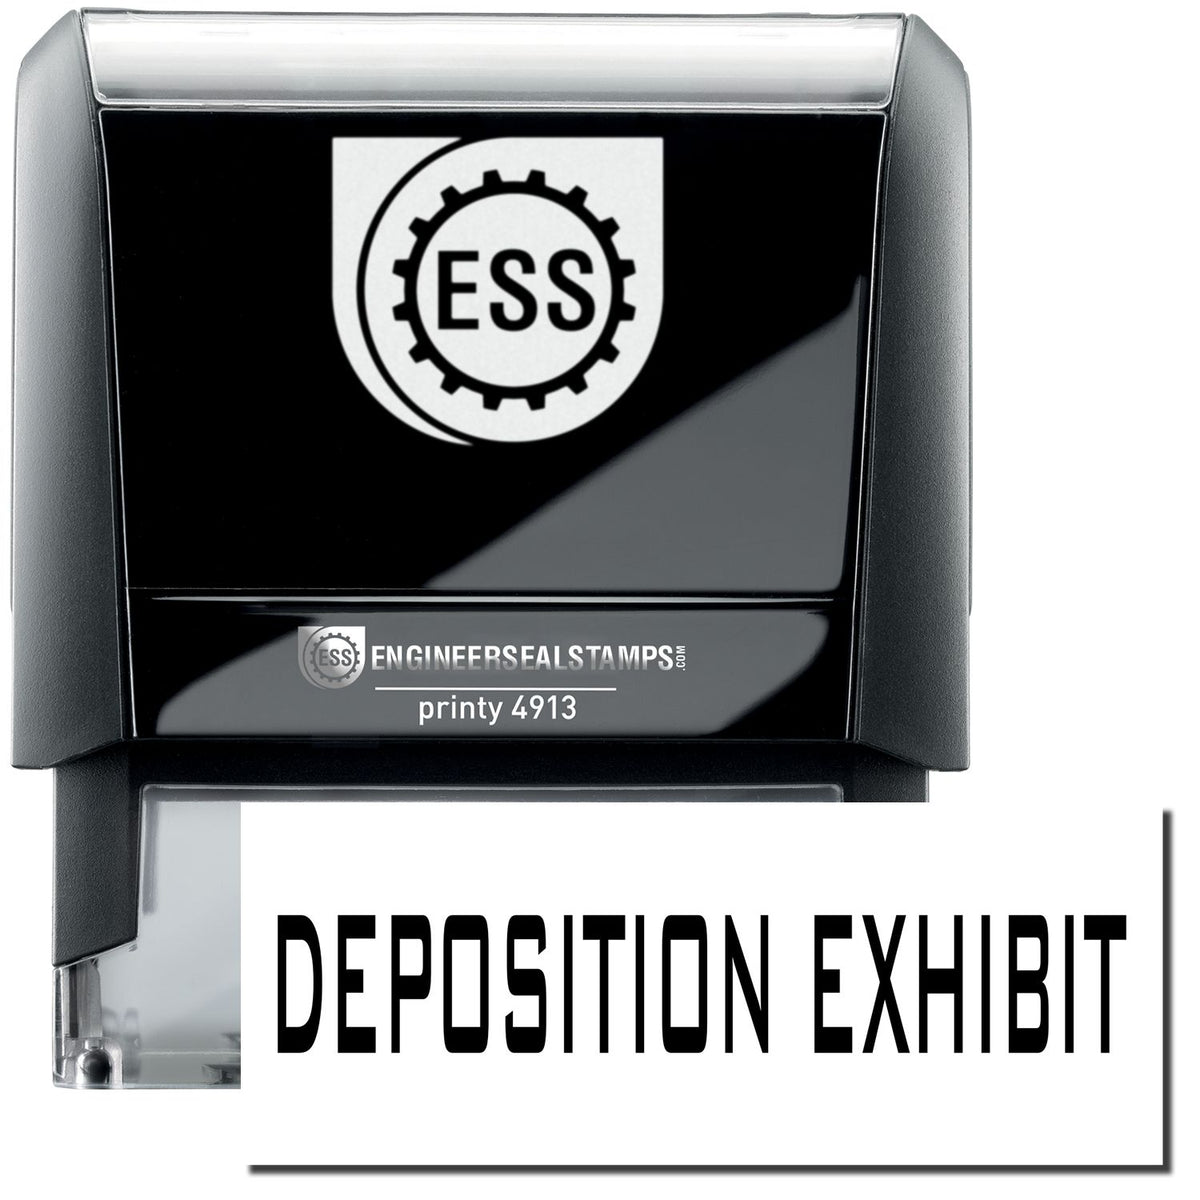 A self-inking stamp with a stamped image showing how the text &quot;DEPOSITION EXHIBIT&quot; in a large bold font is displayed by it.